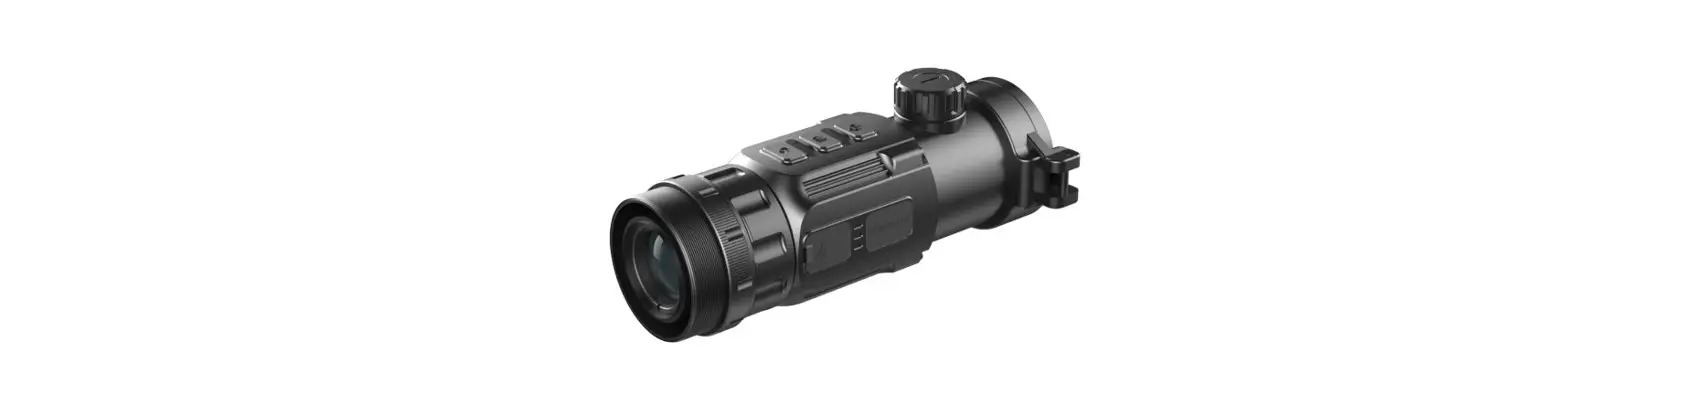 Clip CH50 Series Thermal Imaging Attachment